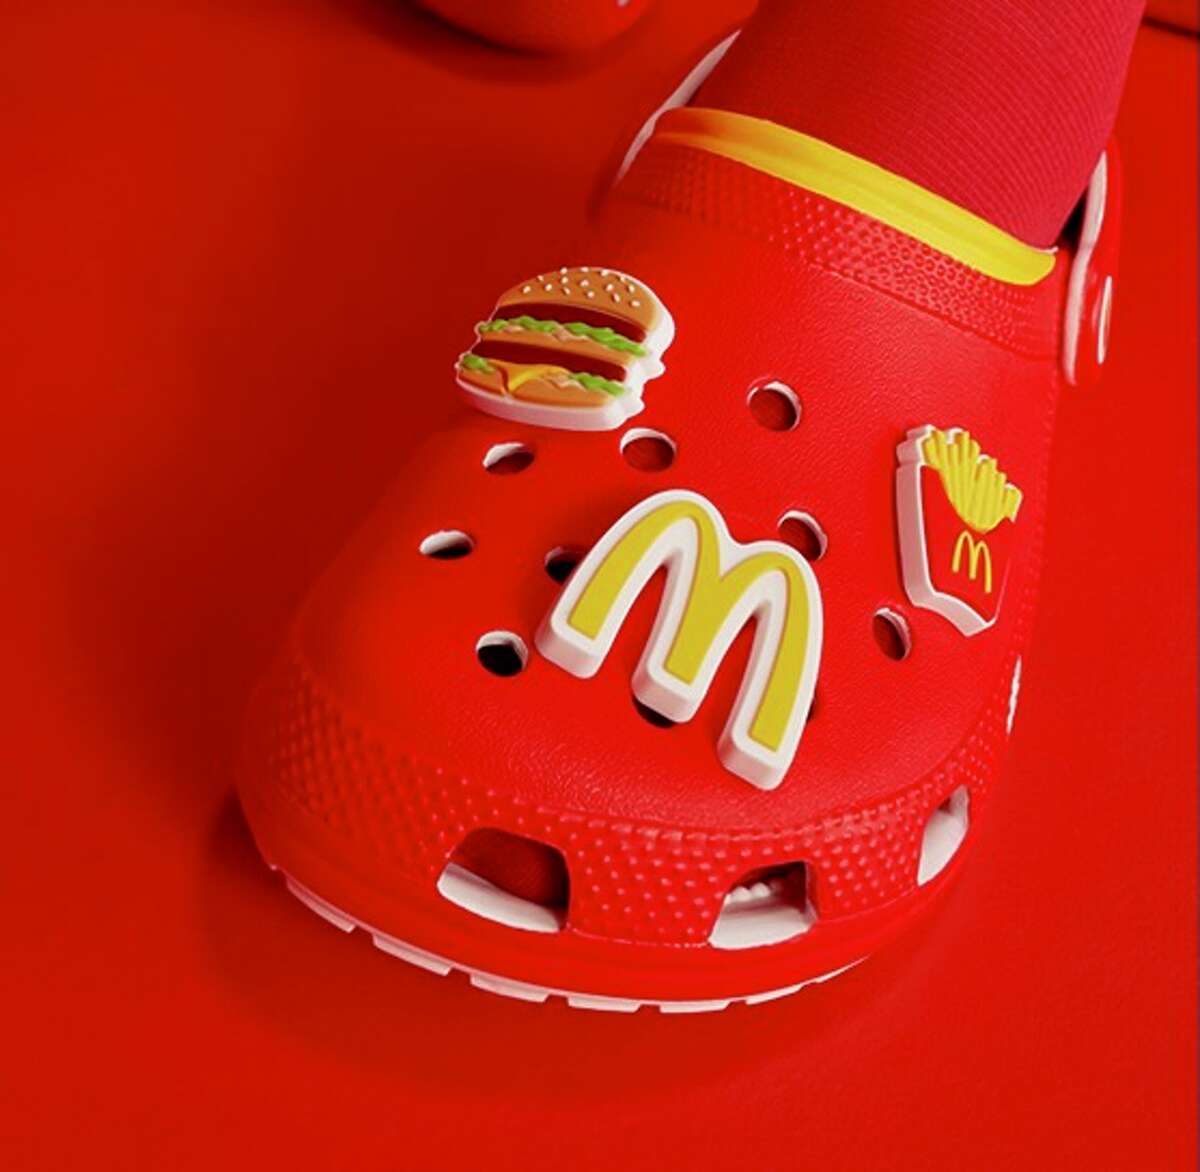 McDonald's characters come to life in new Crocs line